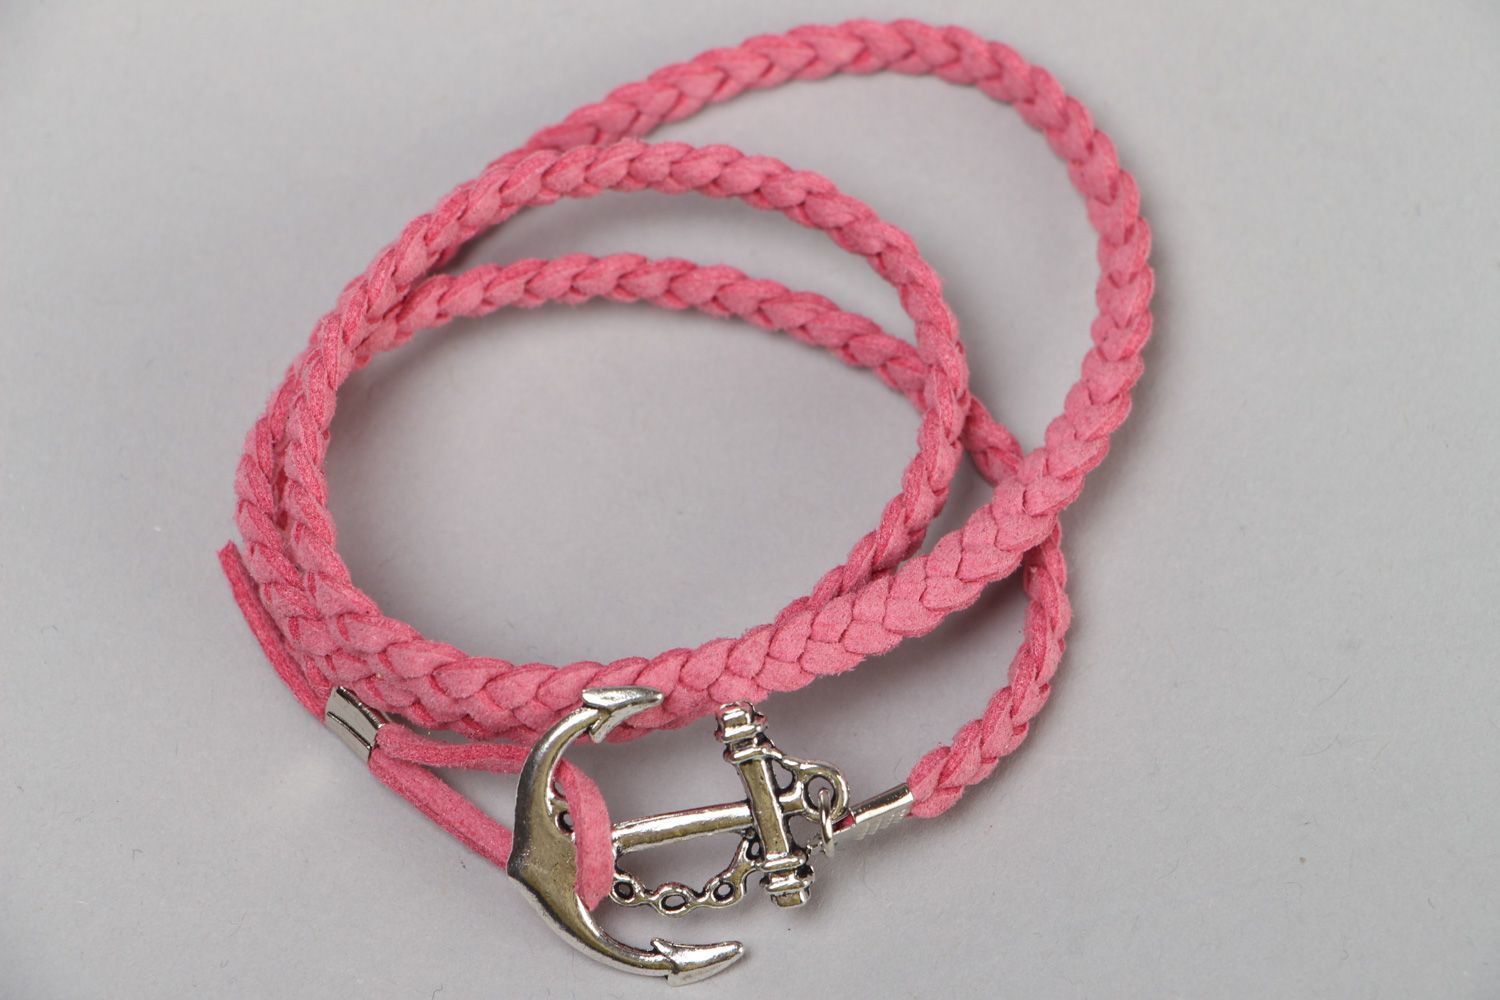 Hand woven artificial leather cord bracelet with charm in 3 turns photo 2